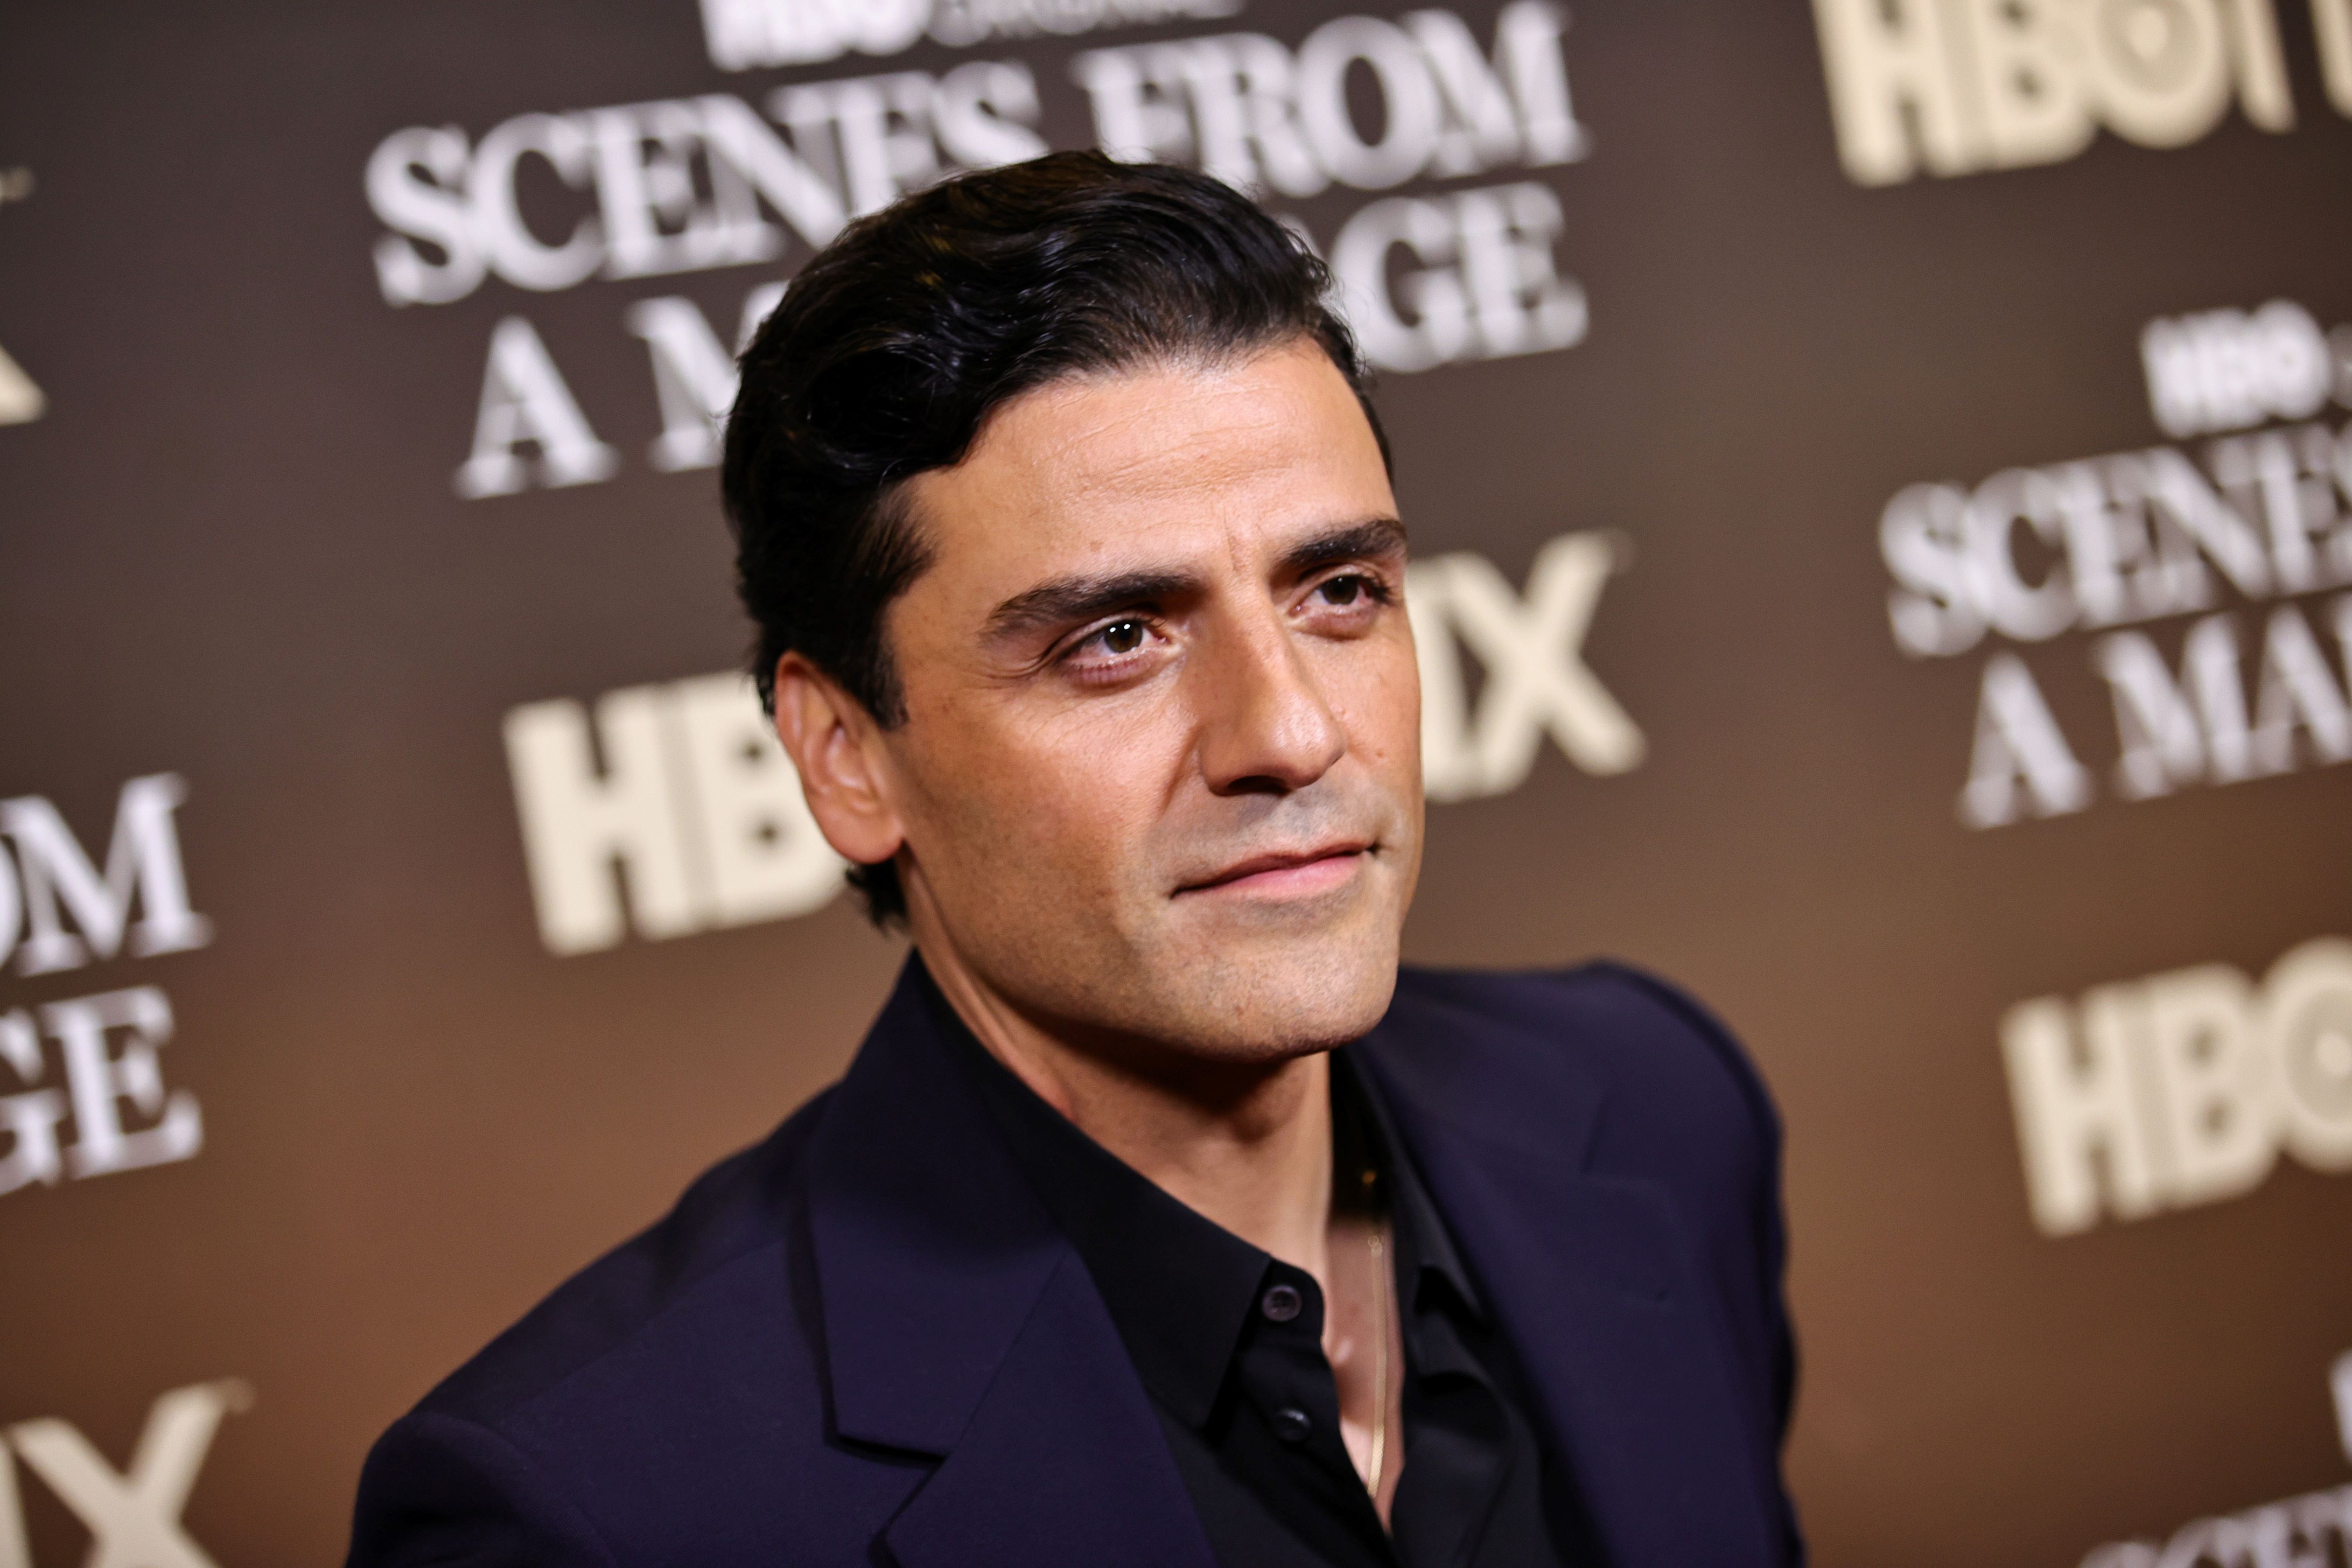 Oscar Isaac standing in front of a brown background with writing on it dressed in black.